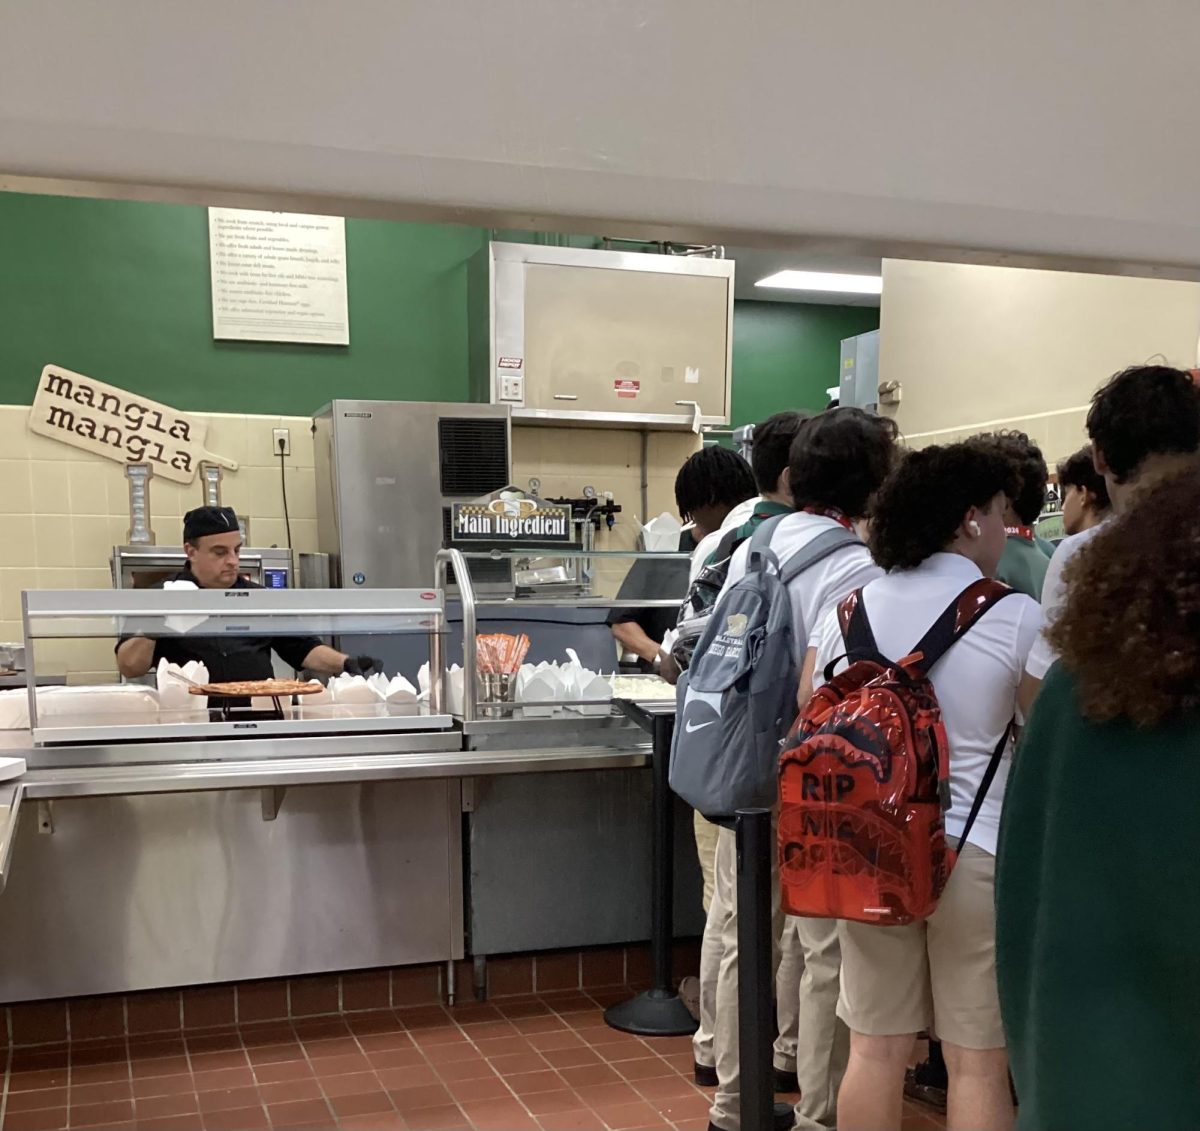 Students+wait+eagerly+in+the+lunch+line+to+be+served+another+tasty+meal+courtesy+of+SAGE+Dining.